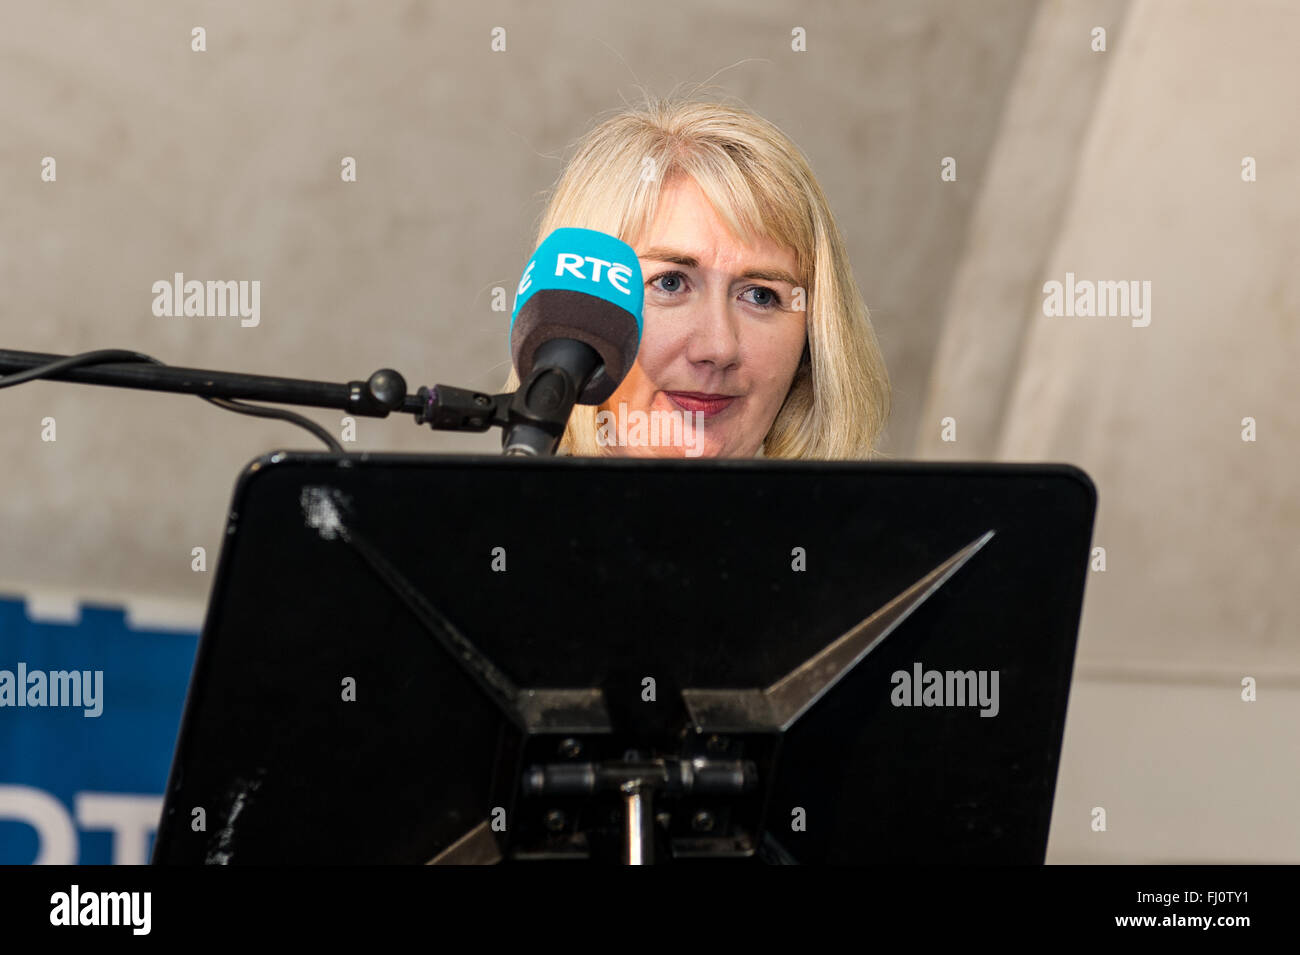 Ballincollig, Ireland. 27th February, 2016. Cork North West Returning Officer, Sinead McNamara announces the result of the first count at Coláiste Choilm in the 2016 Irish General Election. Credit: AG News/Alamy Live News Stock Photo